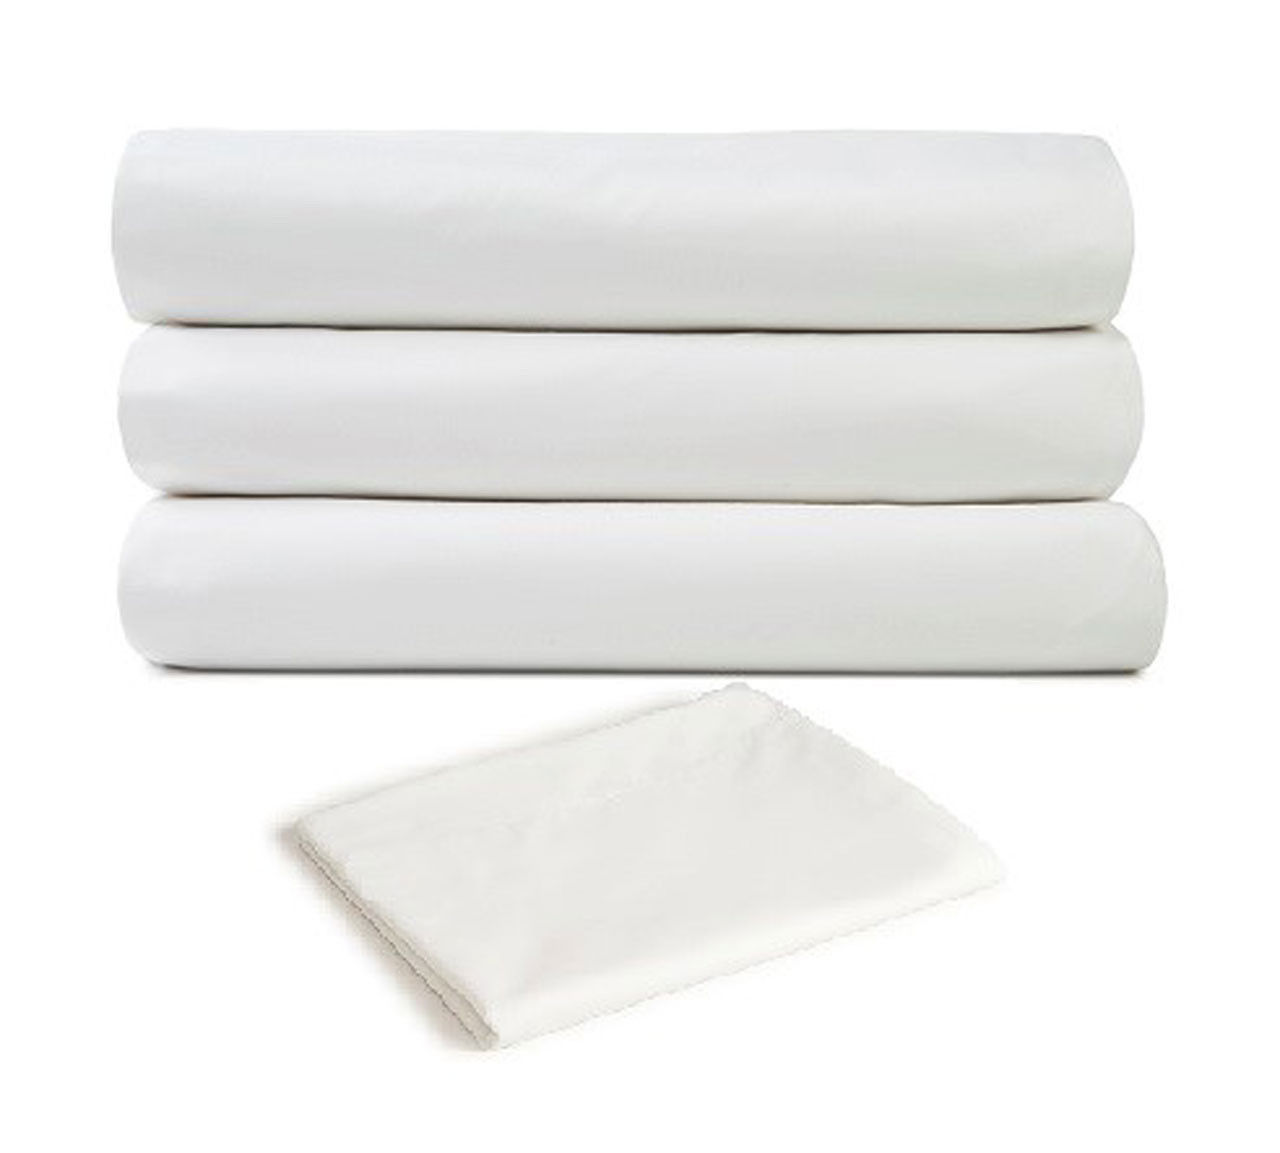 Do 100 polyester bed sheets offer any benefits?